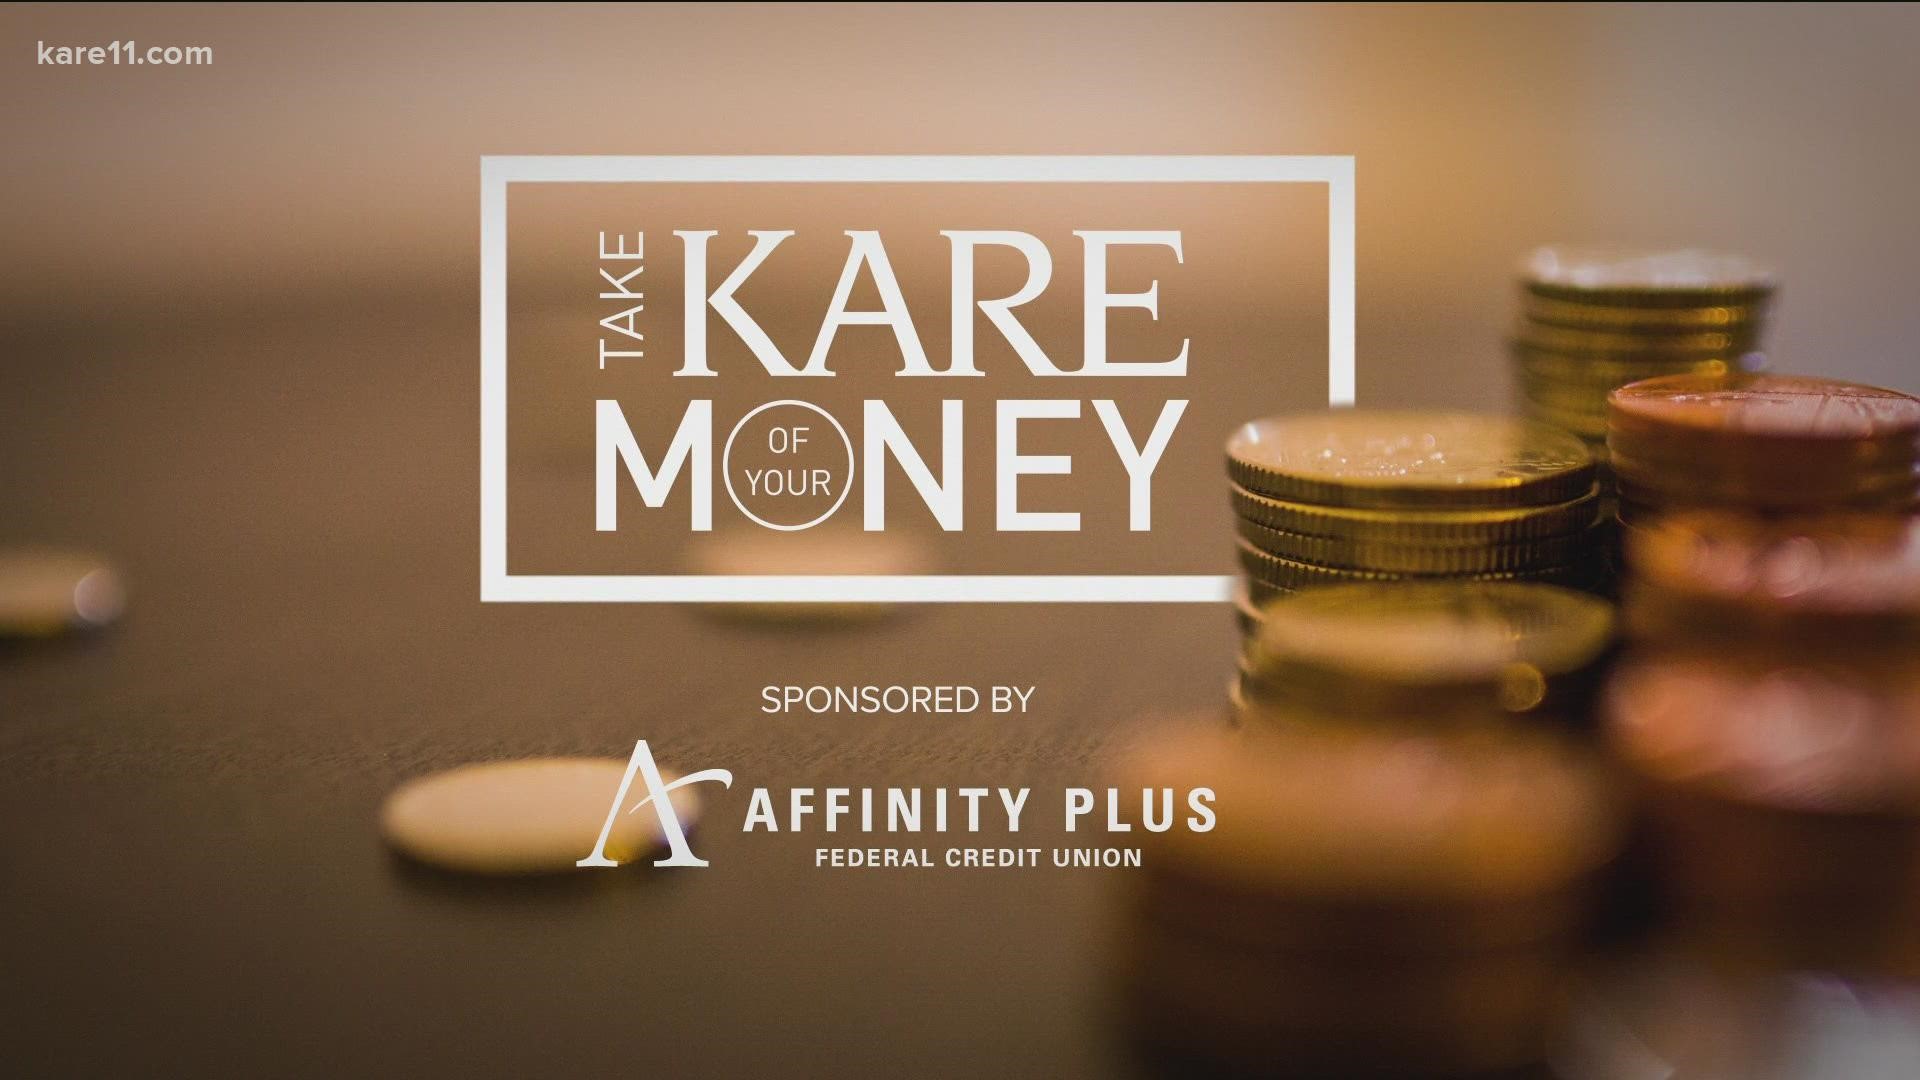 Our Take KARE of your Money team is looking into the top stories of the day that impact your wallet.